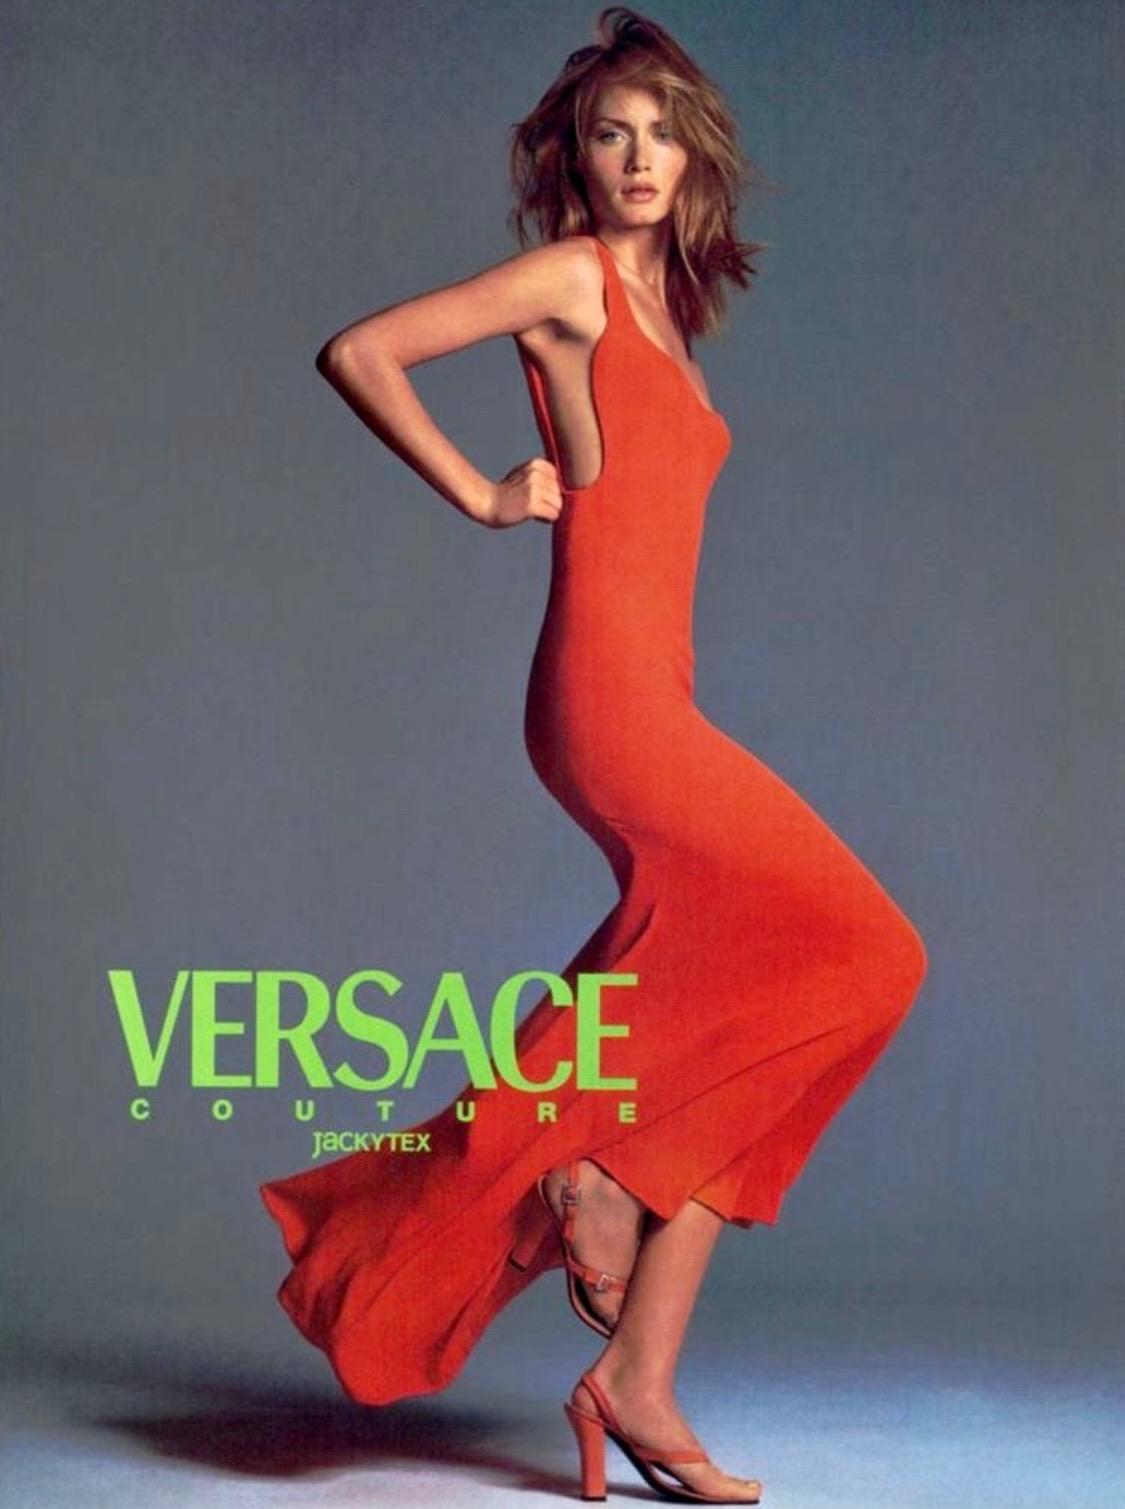 Presenting a elegant bright orange evening gown designed by Gianni Versace for his Spring/Summer 1996 collection. This piece was worn by Helena Christensen as look number 64 on the runway, Amber Valletta in the season's ad campaign, shot by Richard